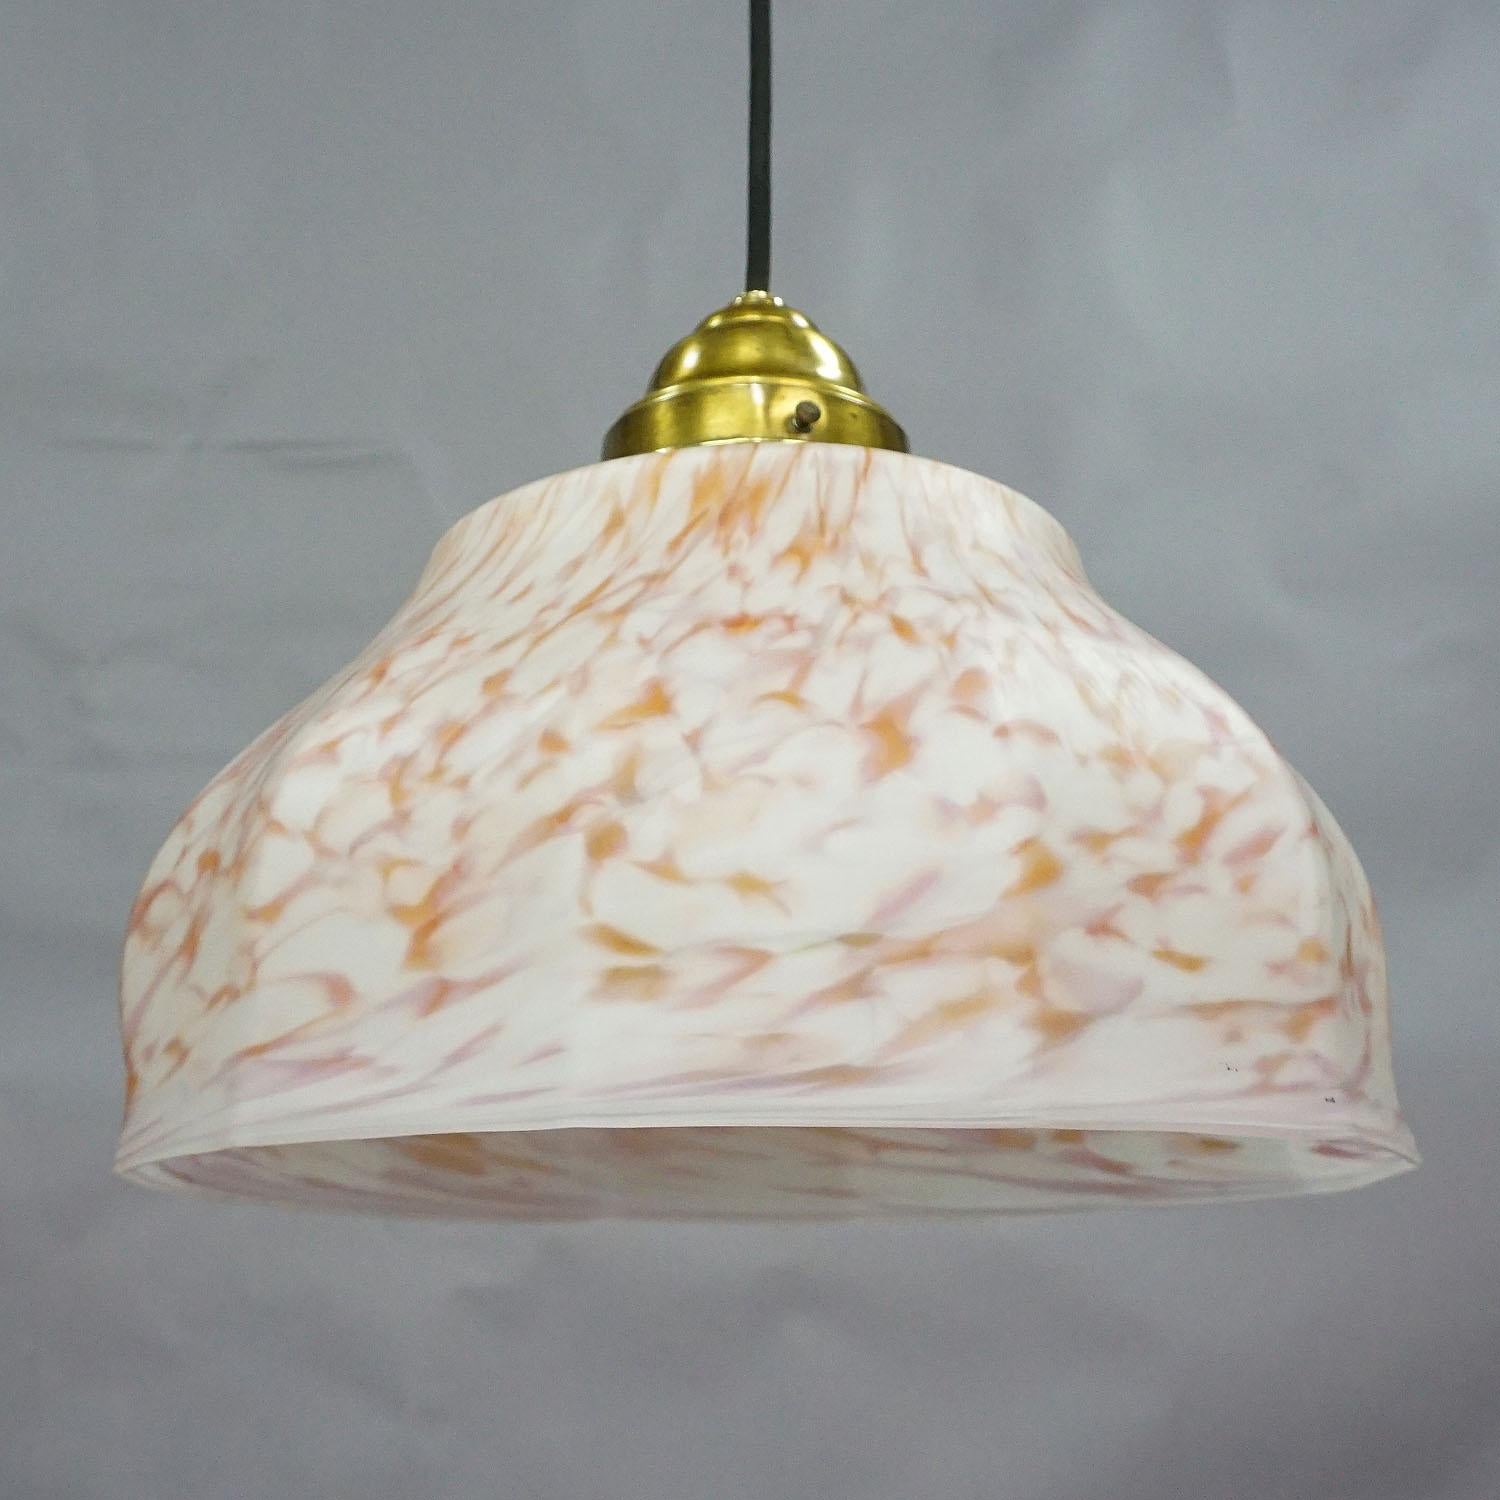 A vintage pendant lamp with a white and antique pink opaline glass shade and brass suspension. The cabling is renewed, working order, with international E27 base lamp holder.

Measures: Height 37.8